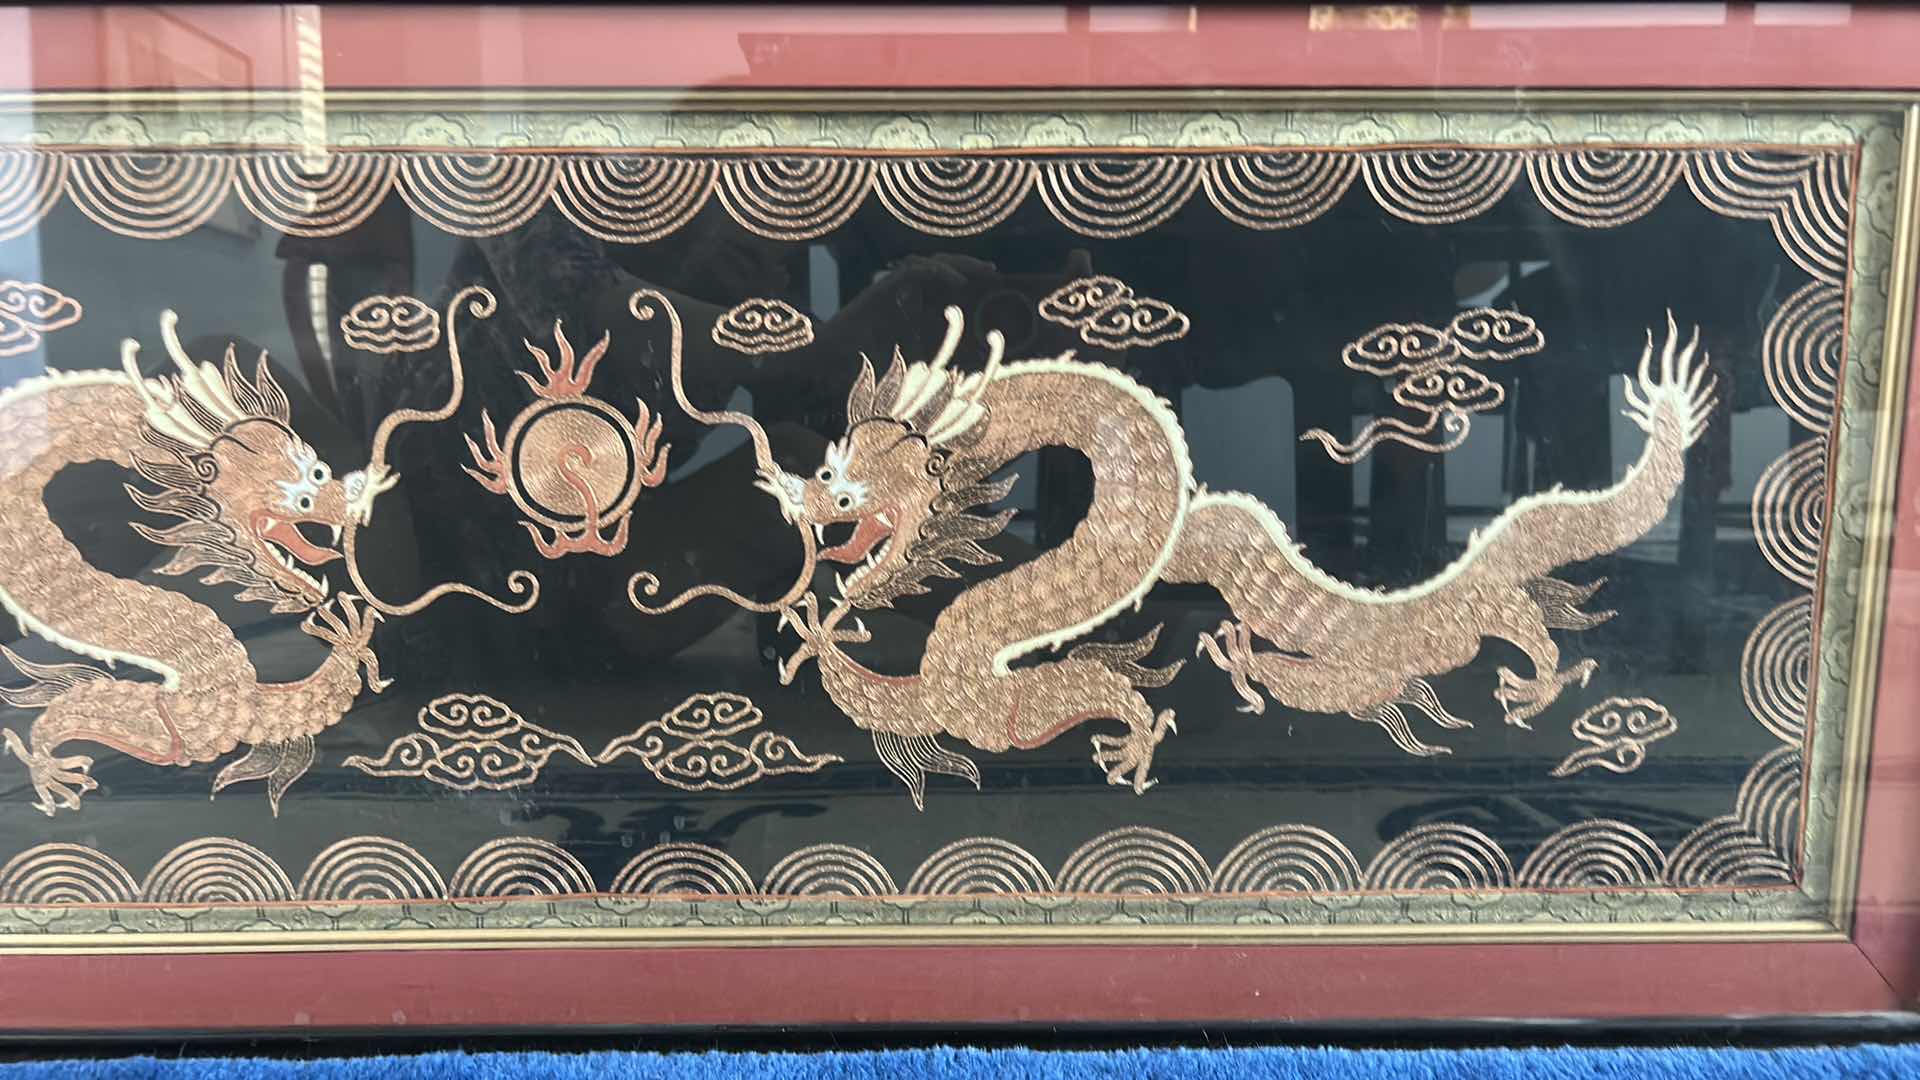 Photo 4 of ANTIQUE CHINESE TEXTILE FABRIC, DRAGONS  SILK WITH SILK THREAD HAND EMBROIDERY ARTWORK FRAMED 4’ x 19”